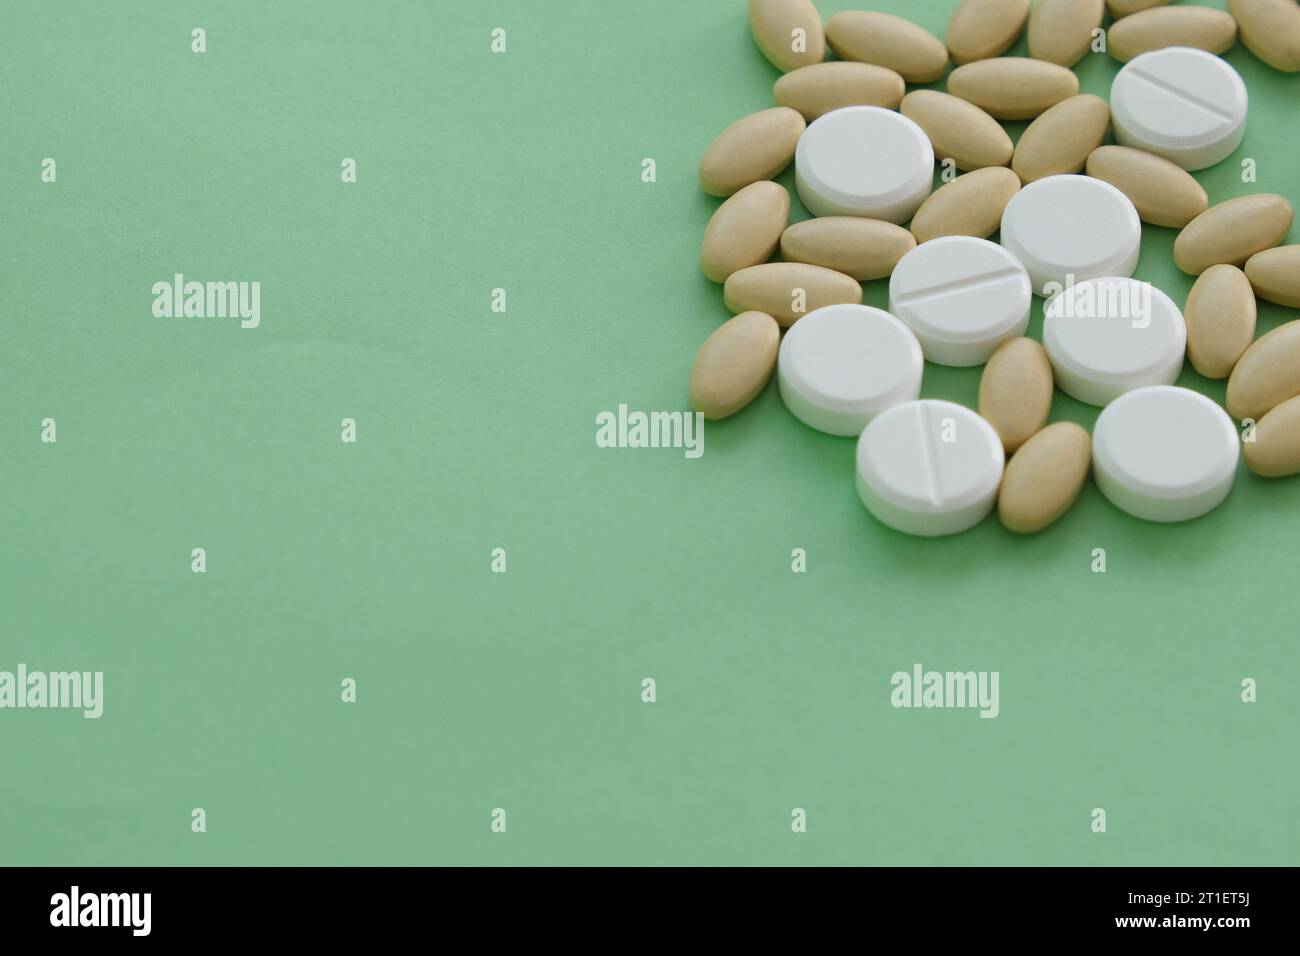 Close up top view heap of pills vitamin supplement on green background. Medical health care pharmacy concept background. Open space area. Stock Photo